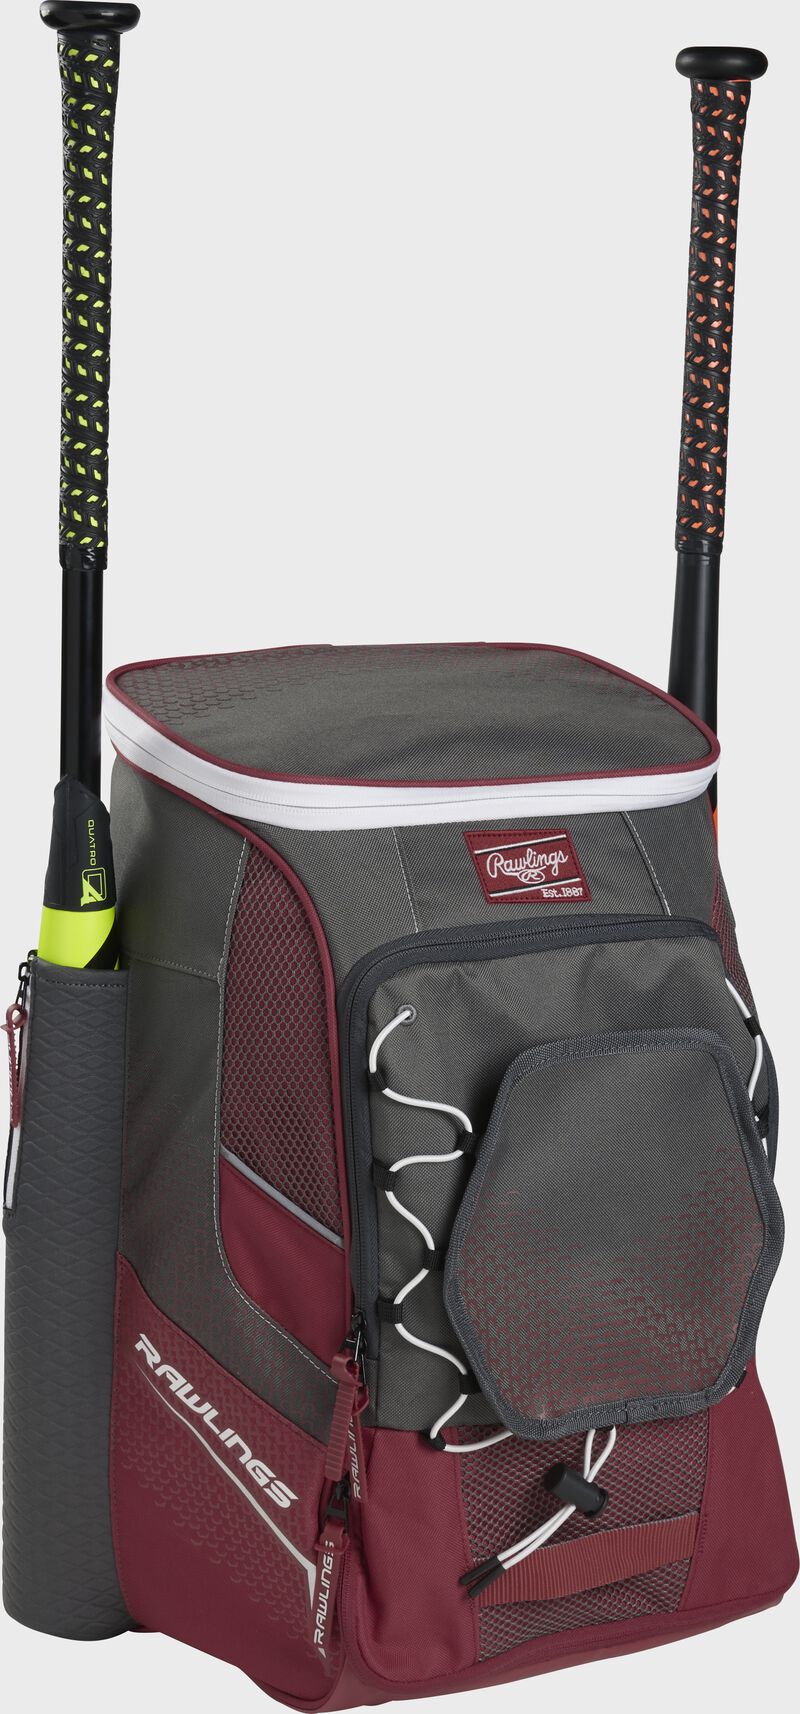 Front left angle of a cardinal Rawlings Impulse baseball gear backpack with two bats - SKU: IMPLSE-C loading=